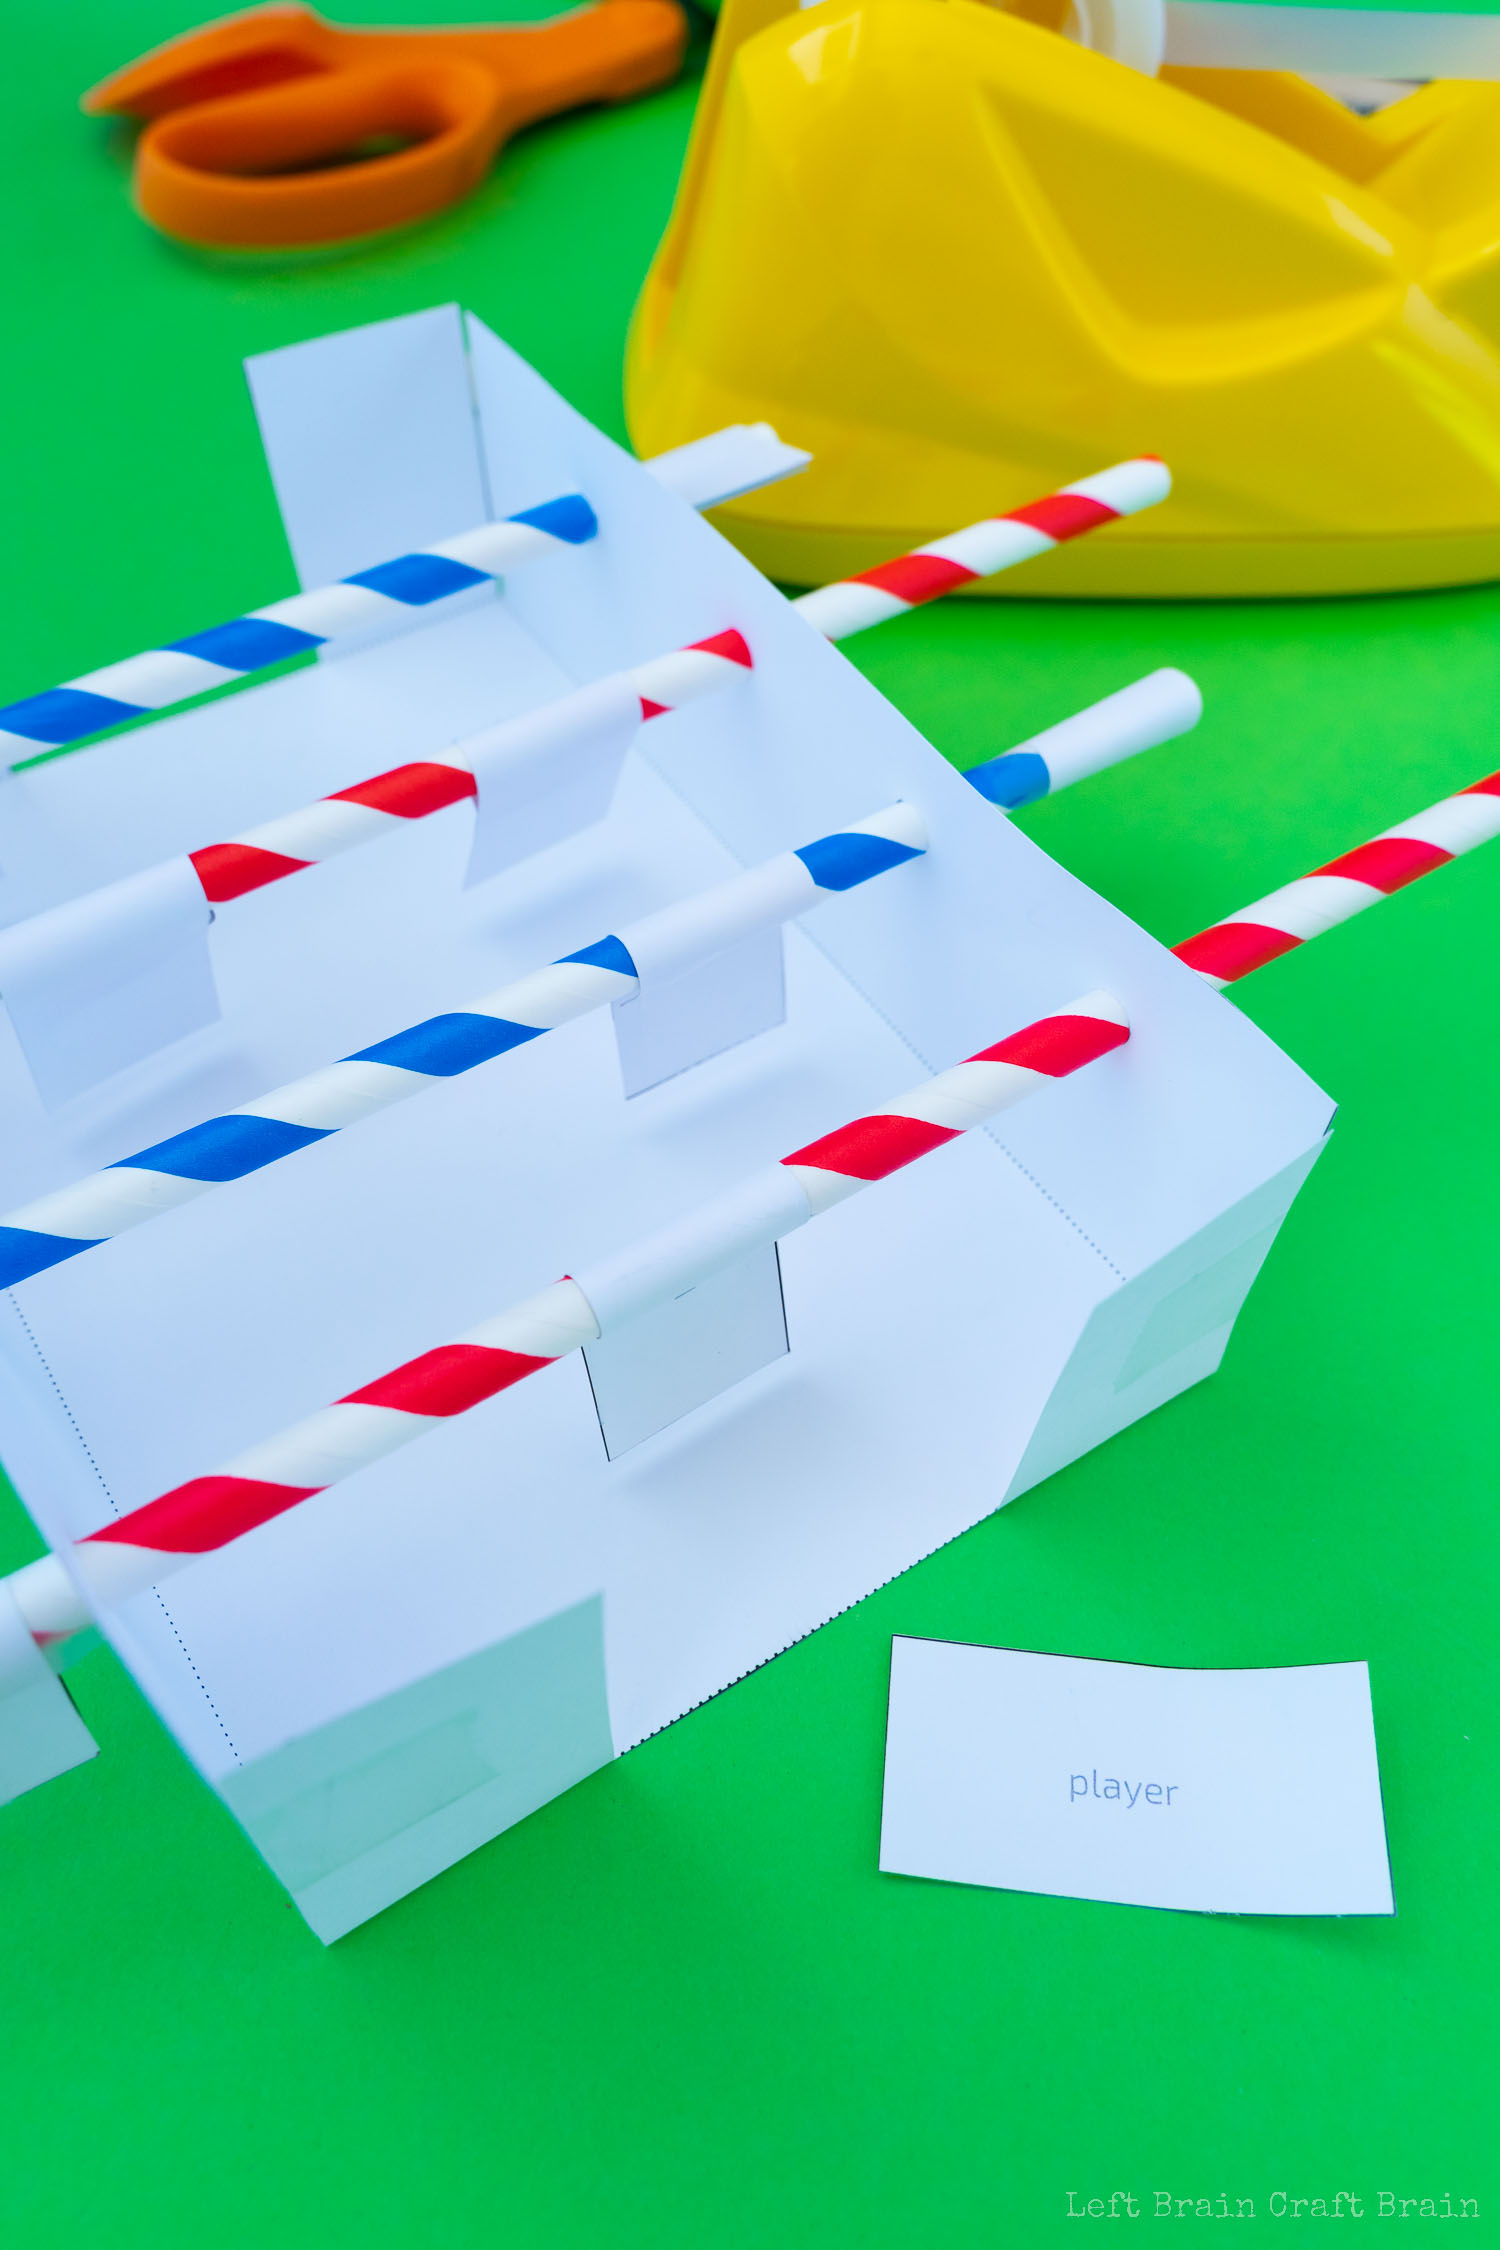 Fold player papers around center of straws (green hole punch, red and blue striped paper straws, orange-handled scissors, yellow tape dispenser, black and wood ruler, white paper template, crumpled paper ball, small pieces of paper that say player on green paper background)